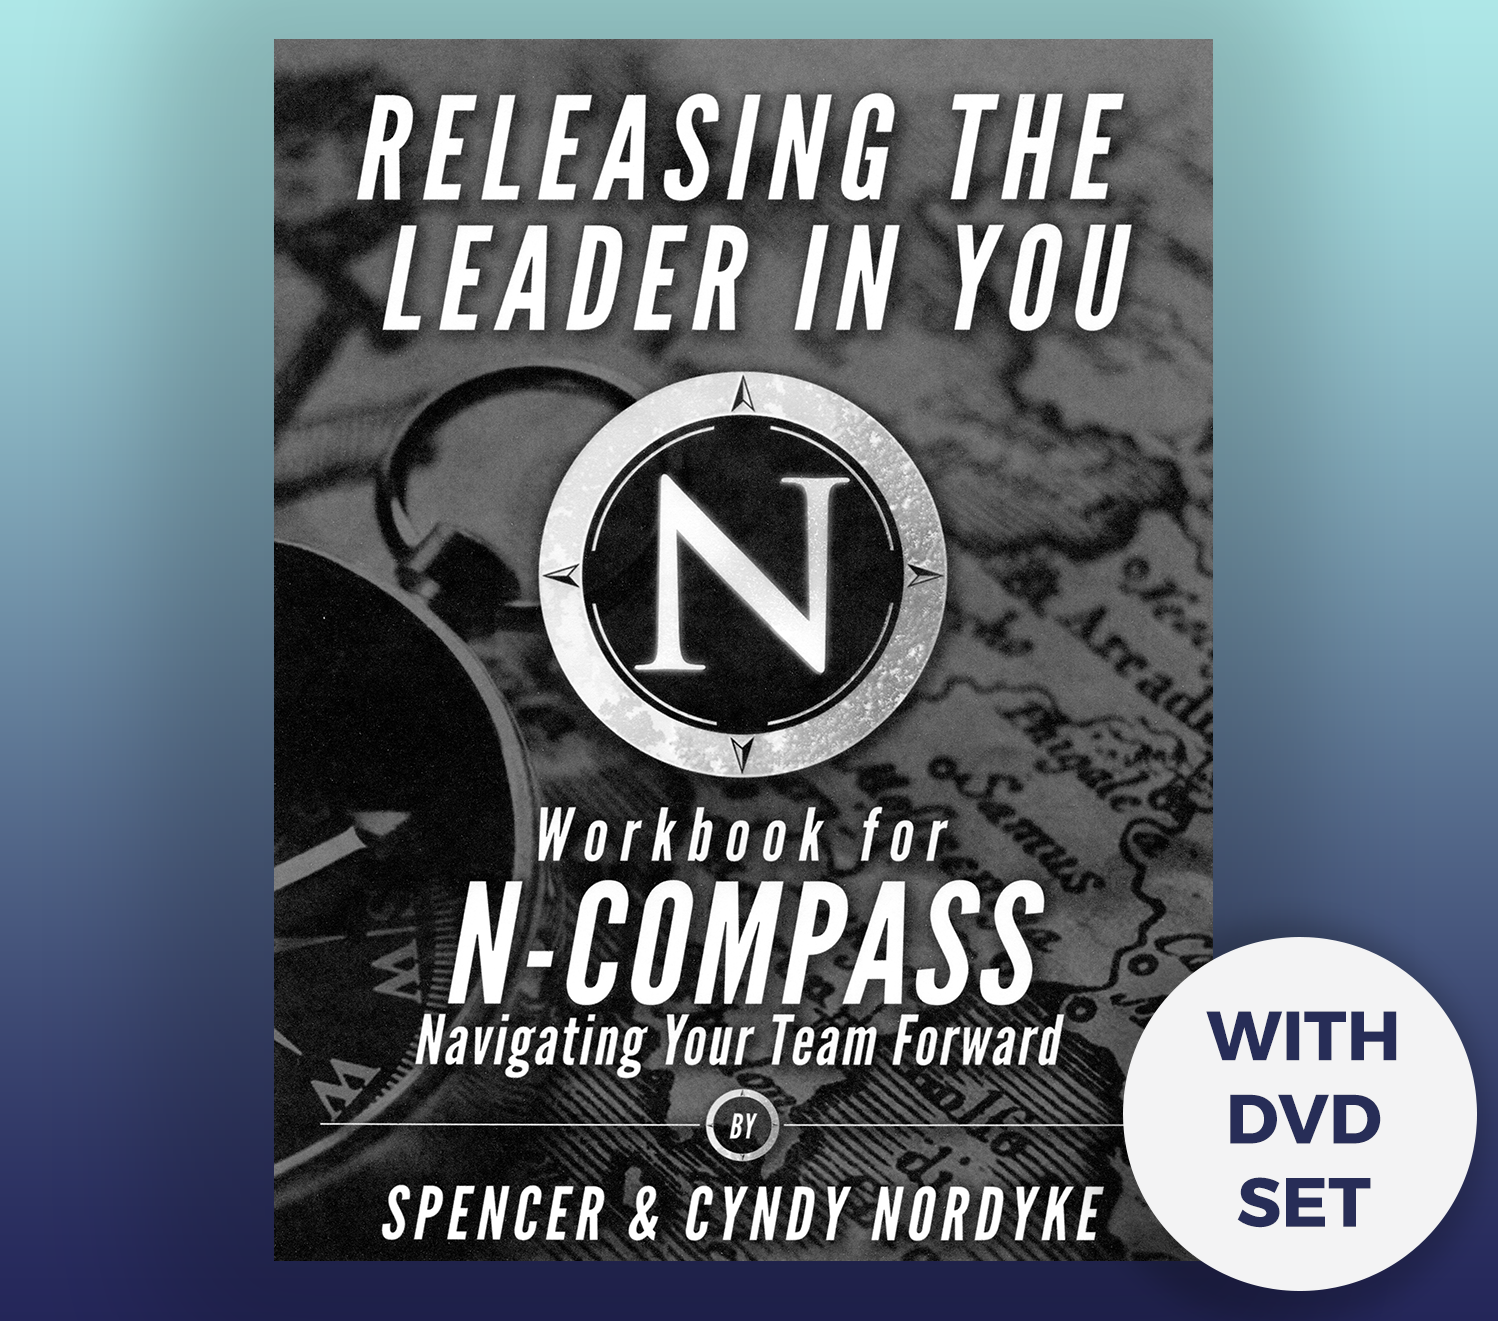 Releasing the Leader in You Notebook & 4 – DVD  set